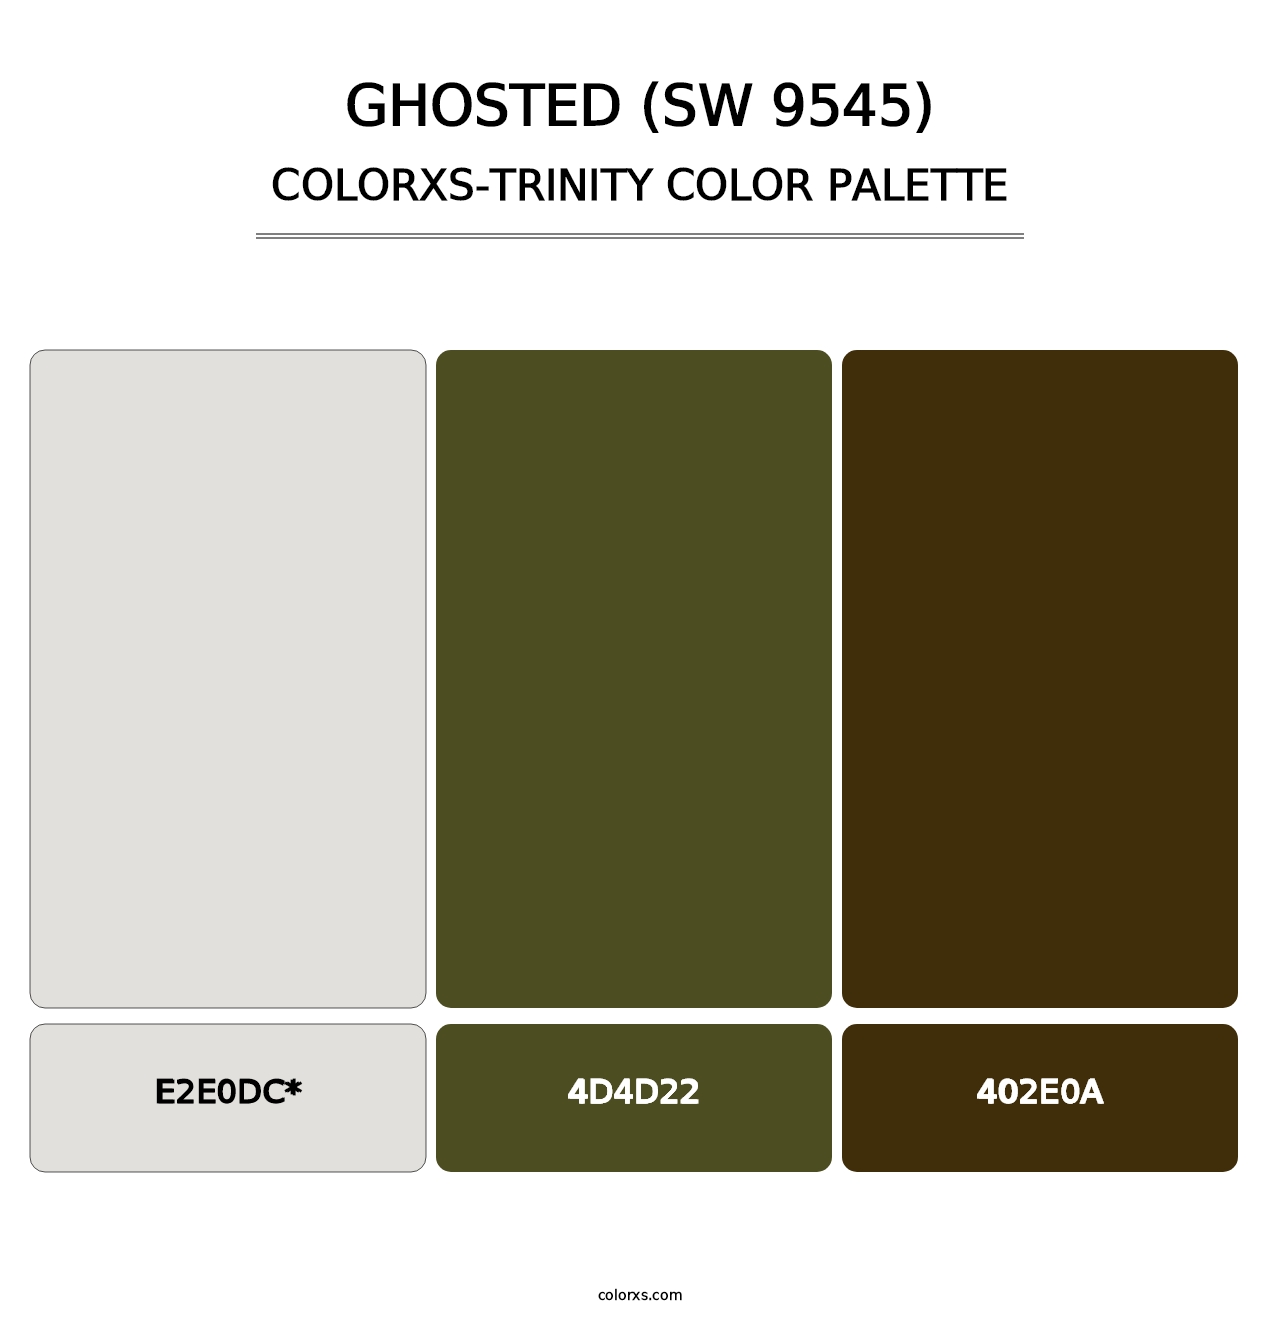 Ghosted (SW 9545) - Colorxs Trinity Palette